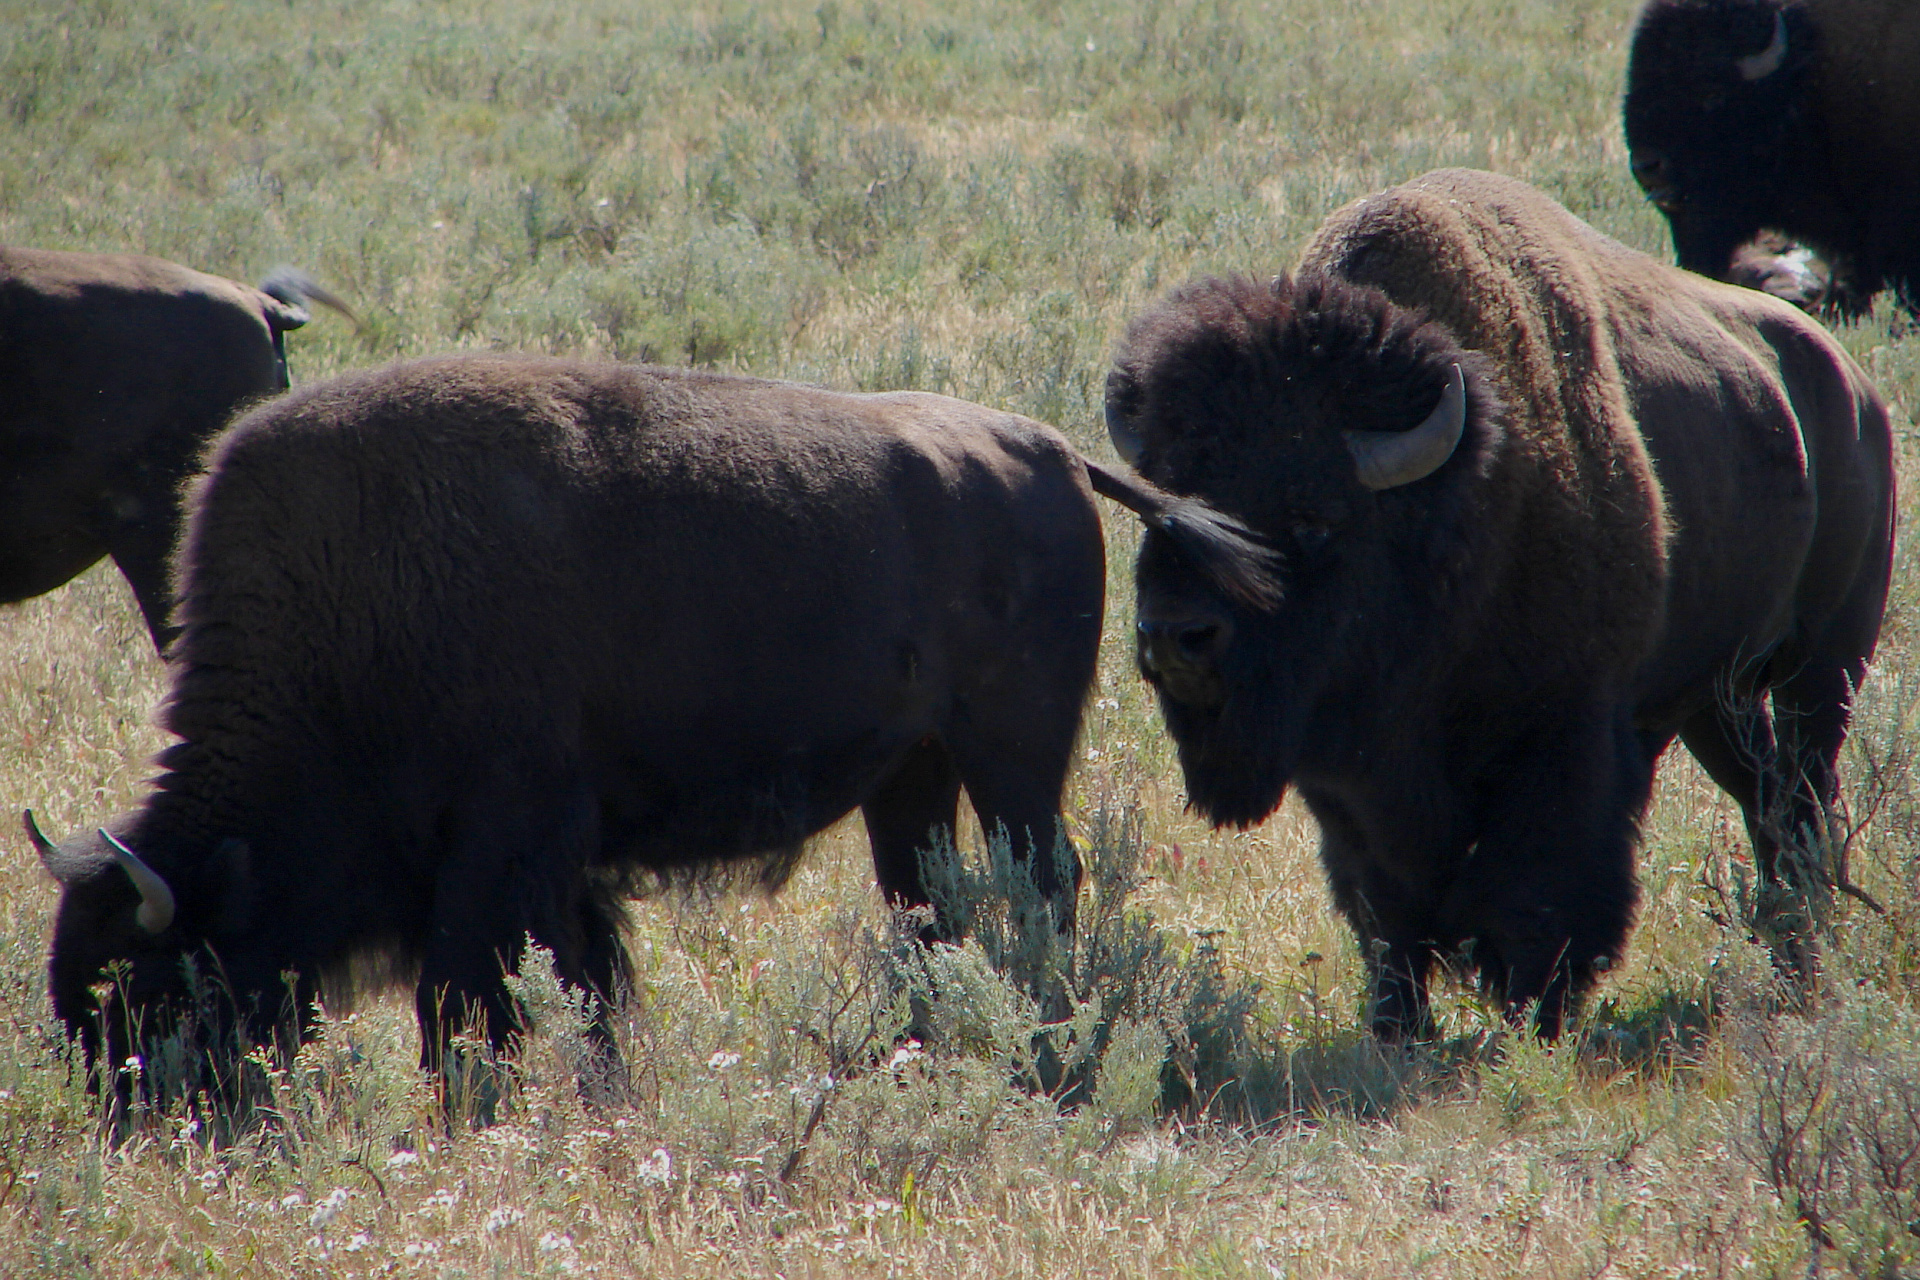 First Herd (Travels » US Trip 1: Cheyenne Country » The Journey » Yellowstone National Park » Buffalos)